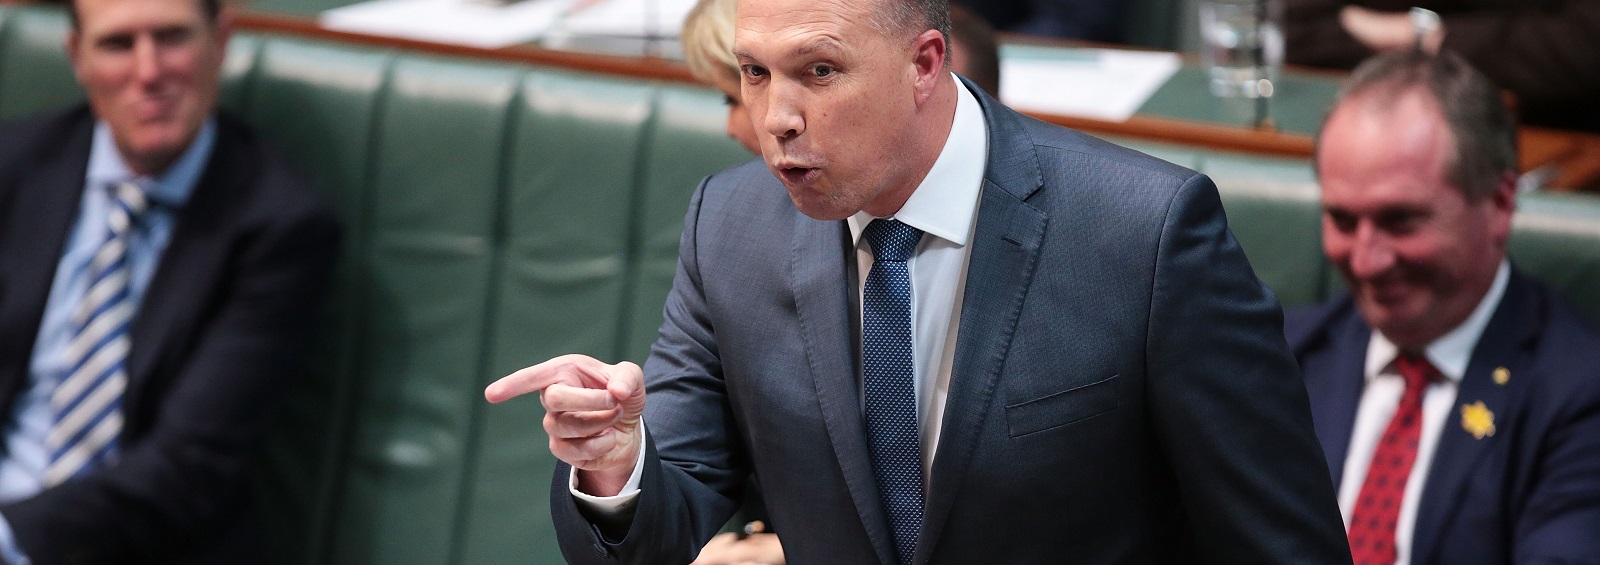 Immigration Minister Peter Dutton (Photo: Stefan Postles/Getty Images)